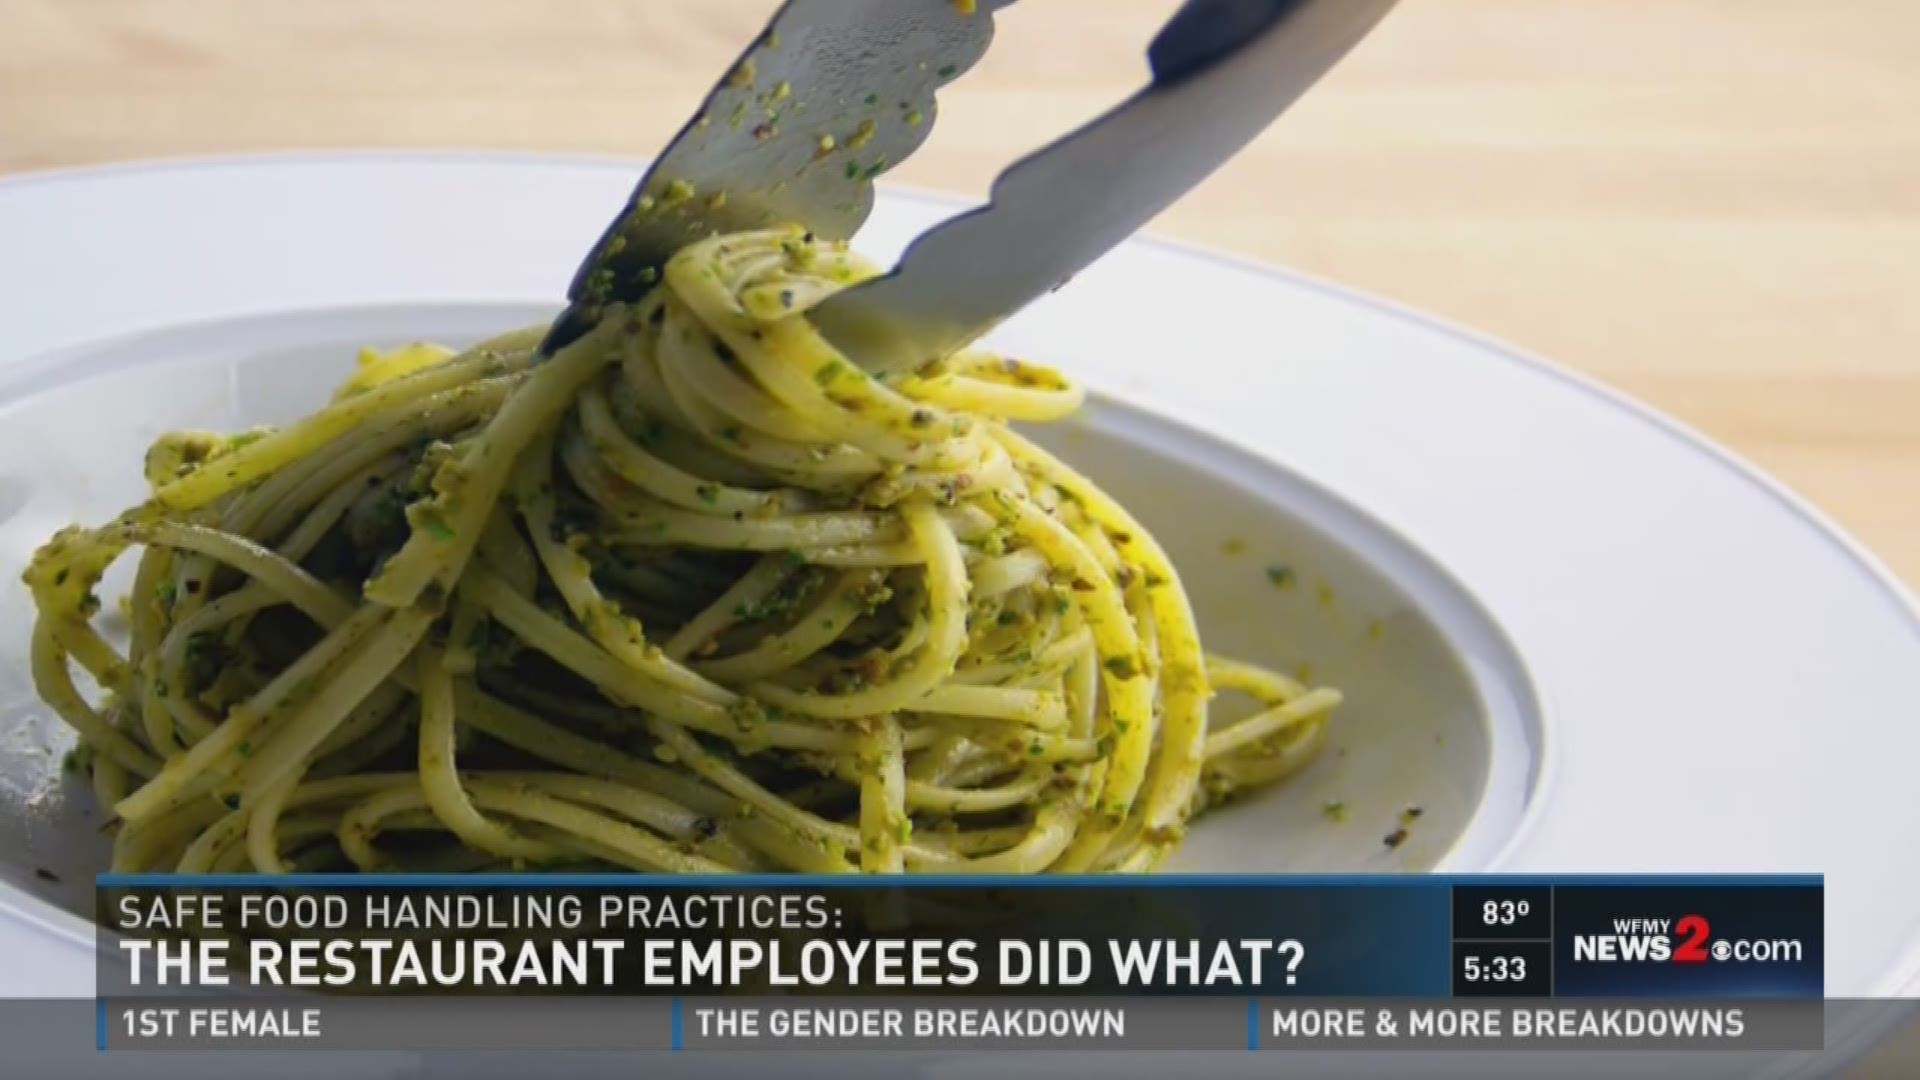 Safe Food Handling Practices: The Restaurant Employees Did What?